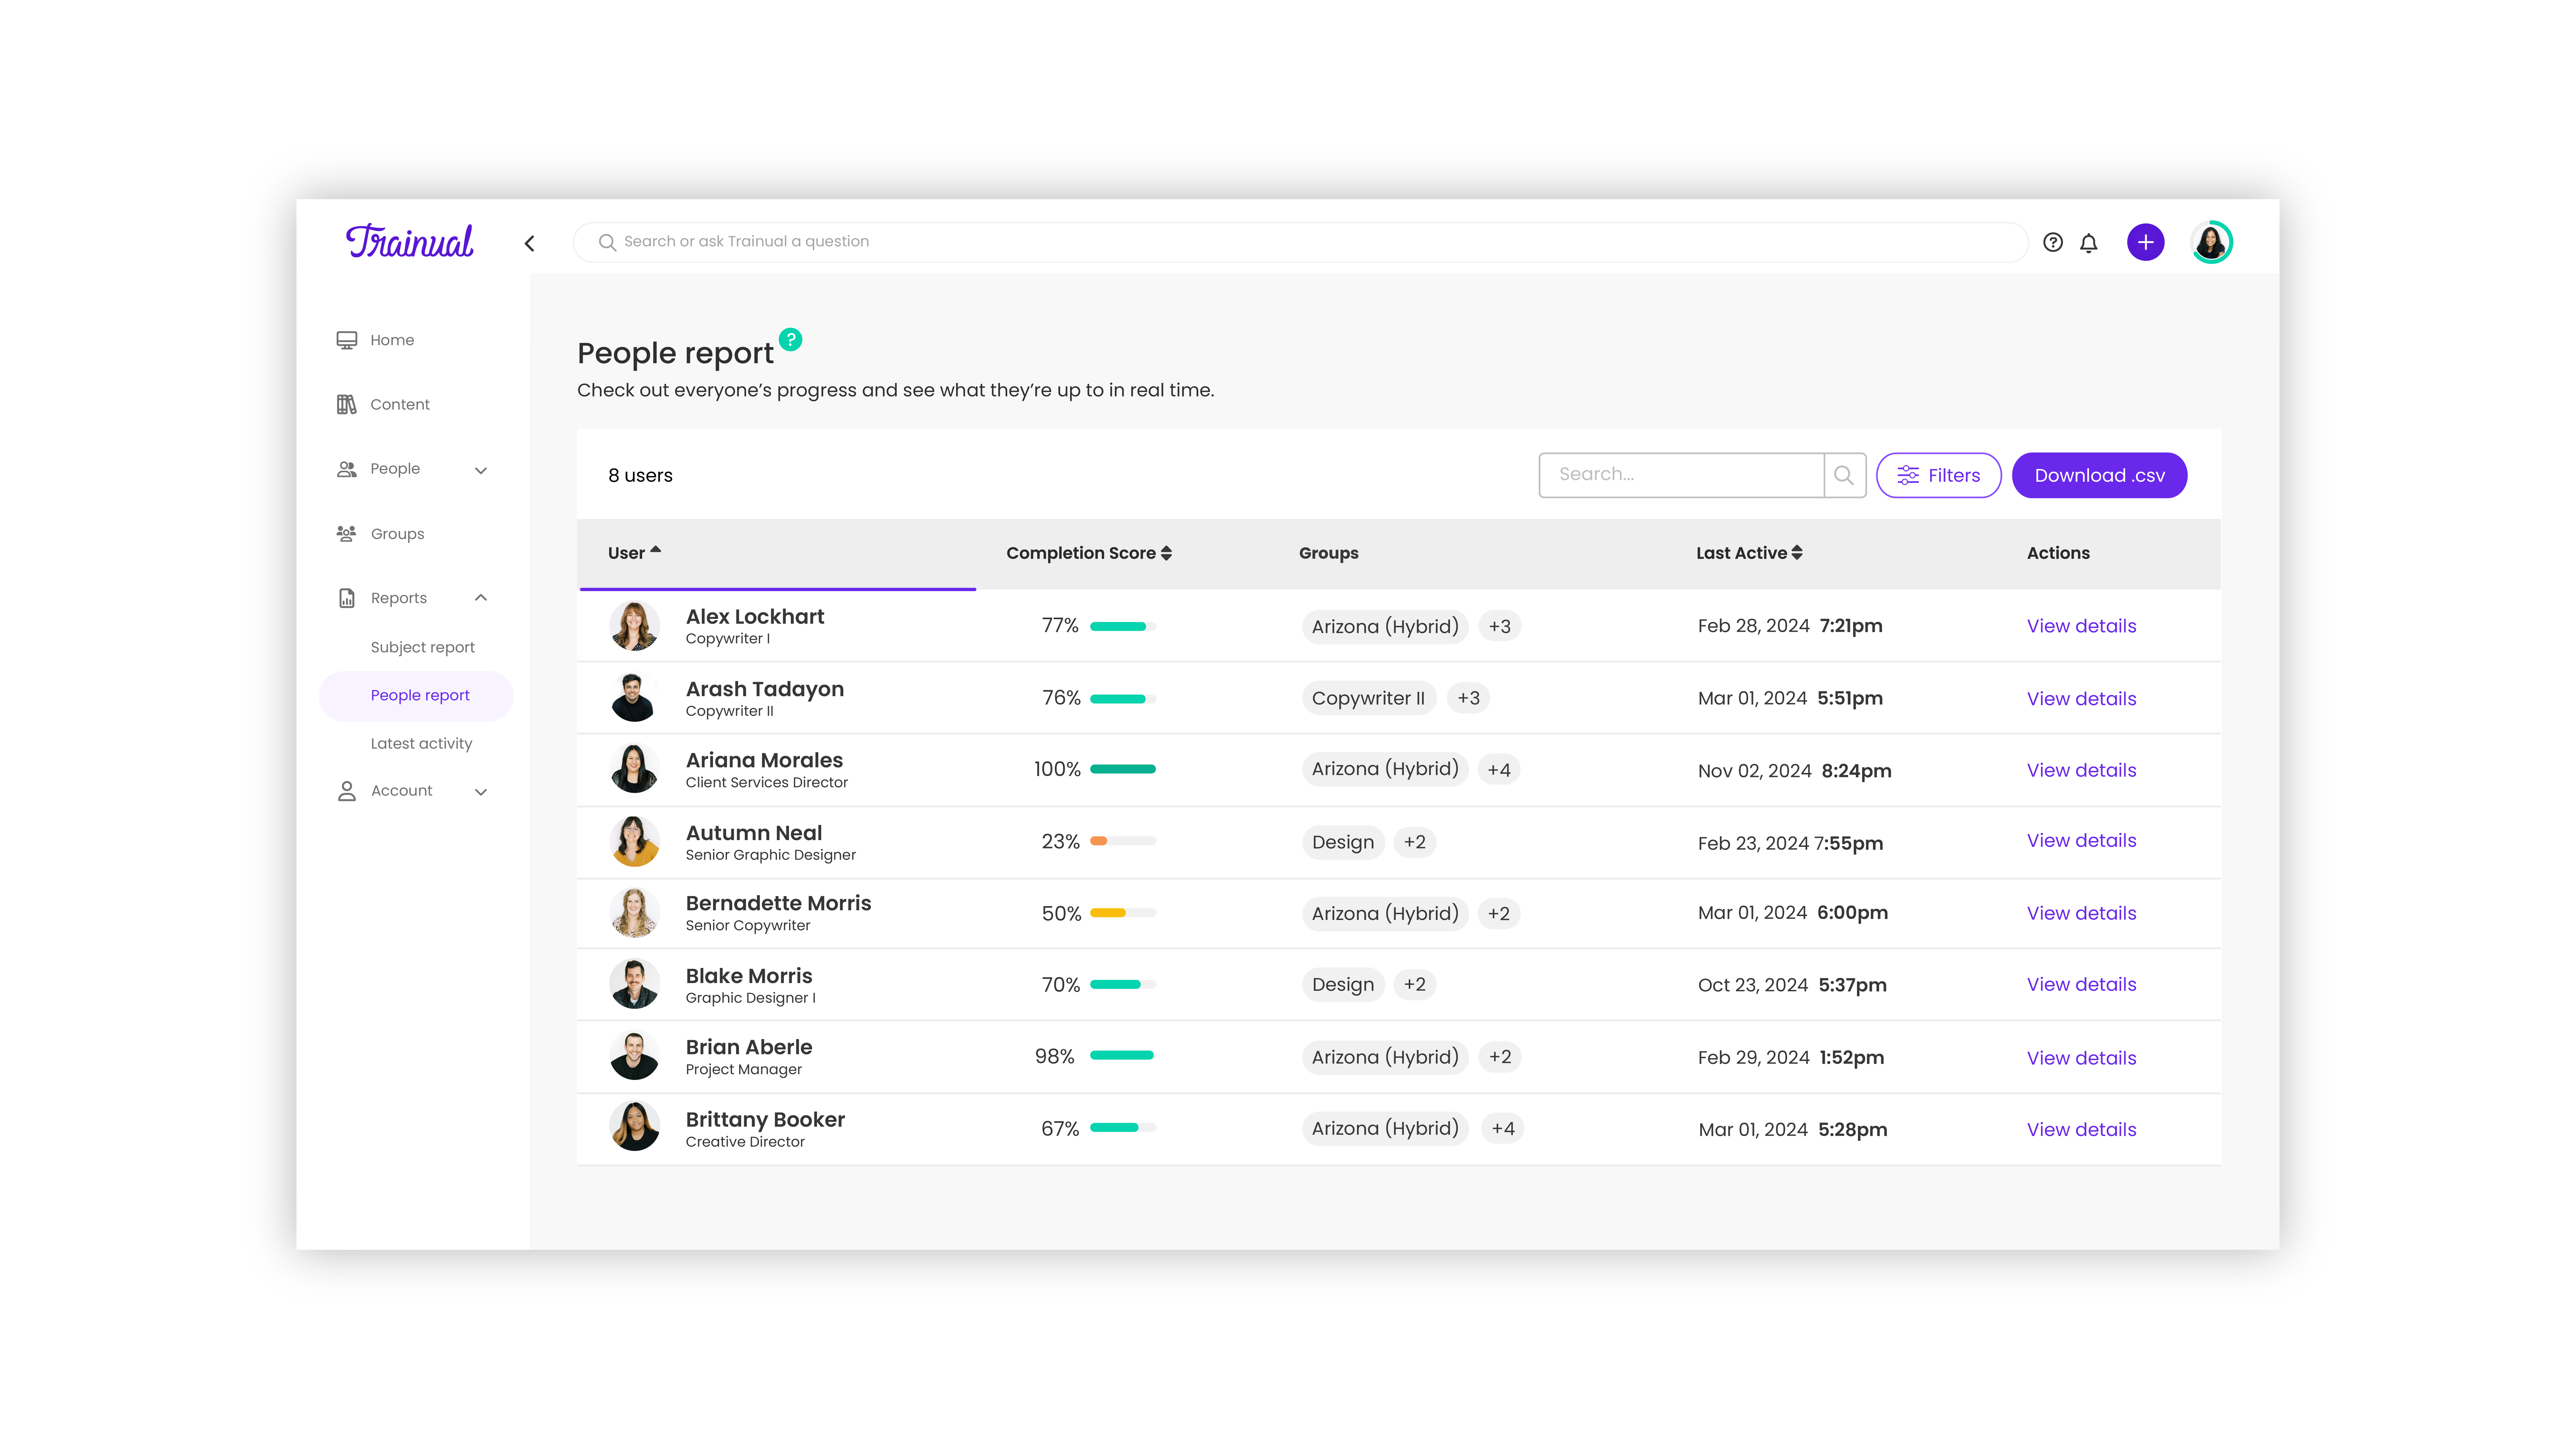 Keep tabs on training and onboarding with people and subject reports